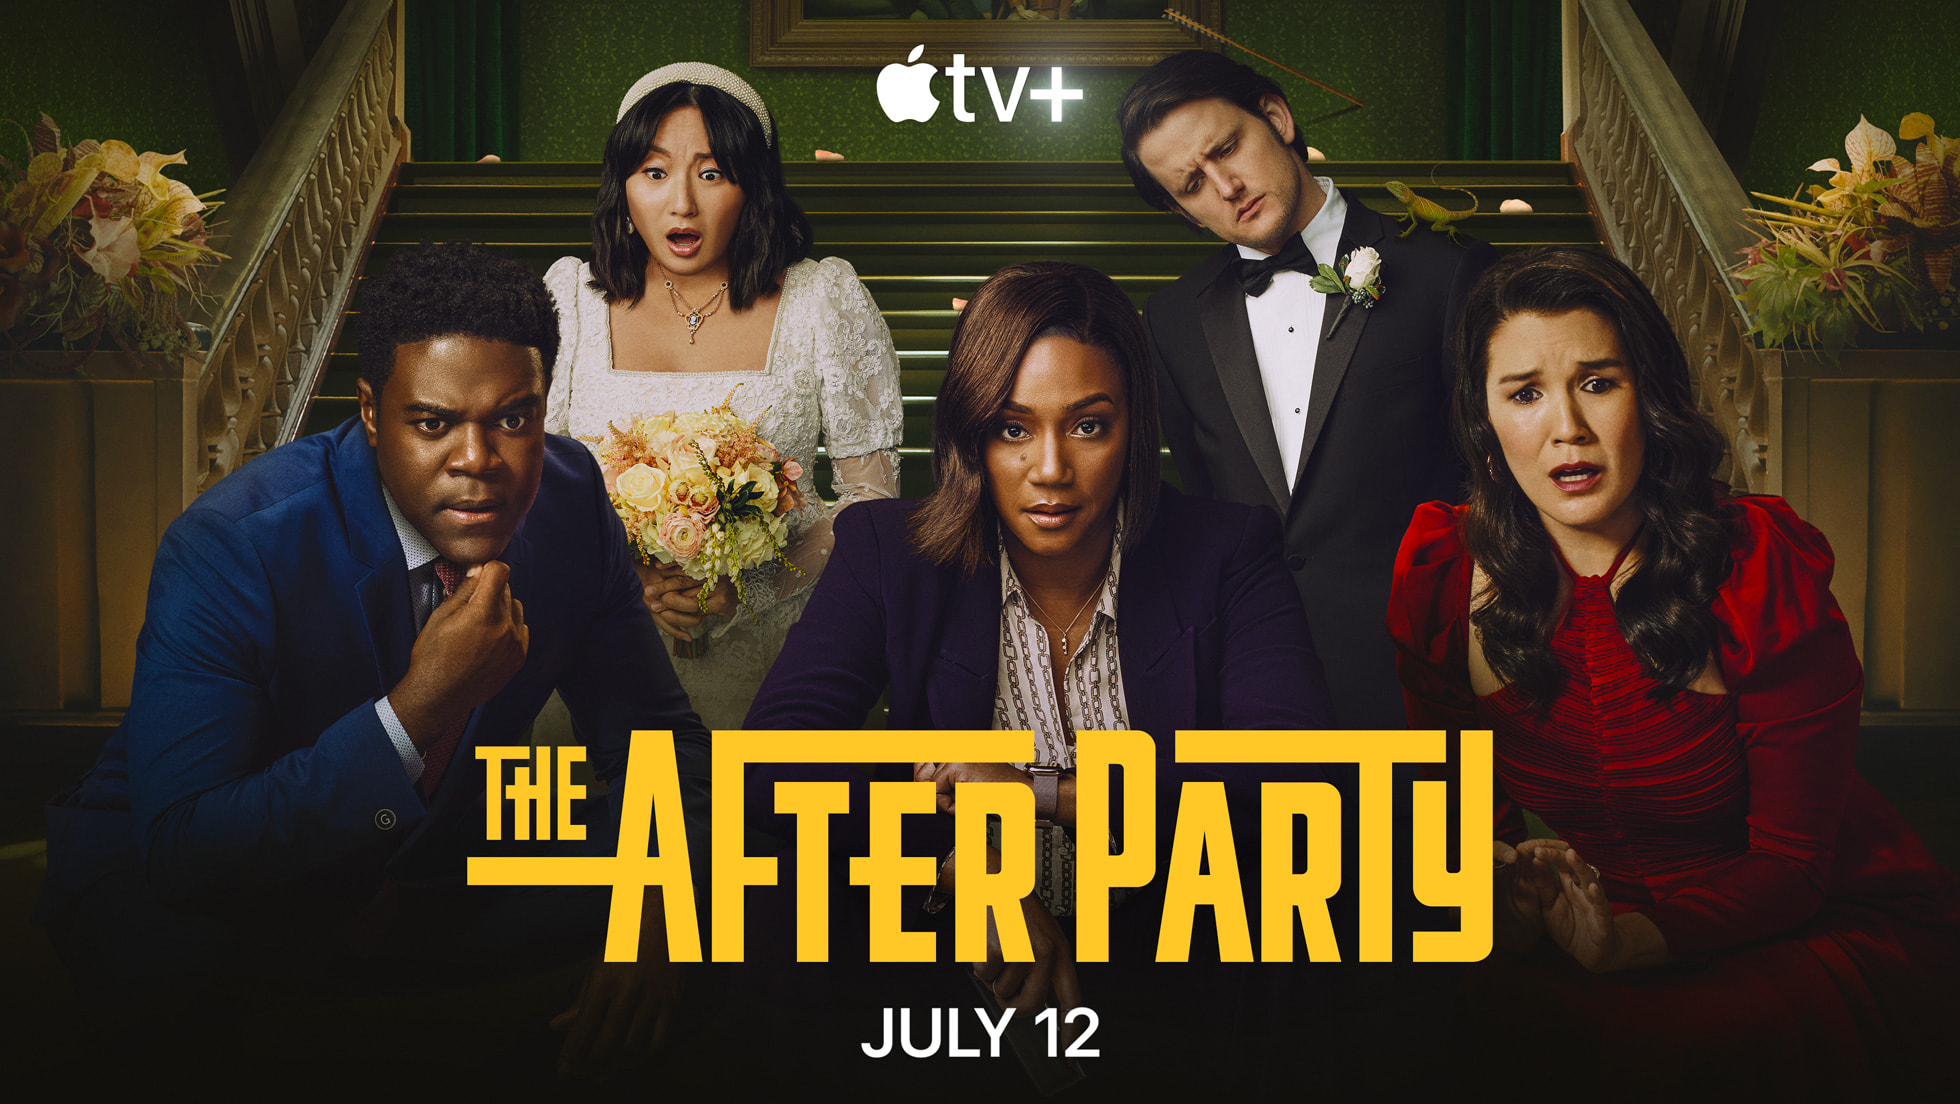 Apple TV+'s global hit murder mystery comedy “The Afterparty